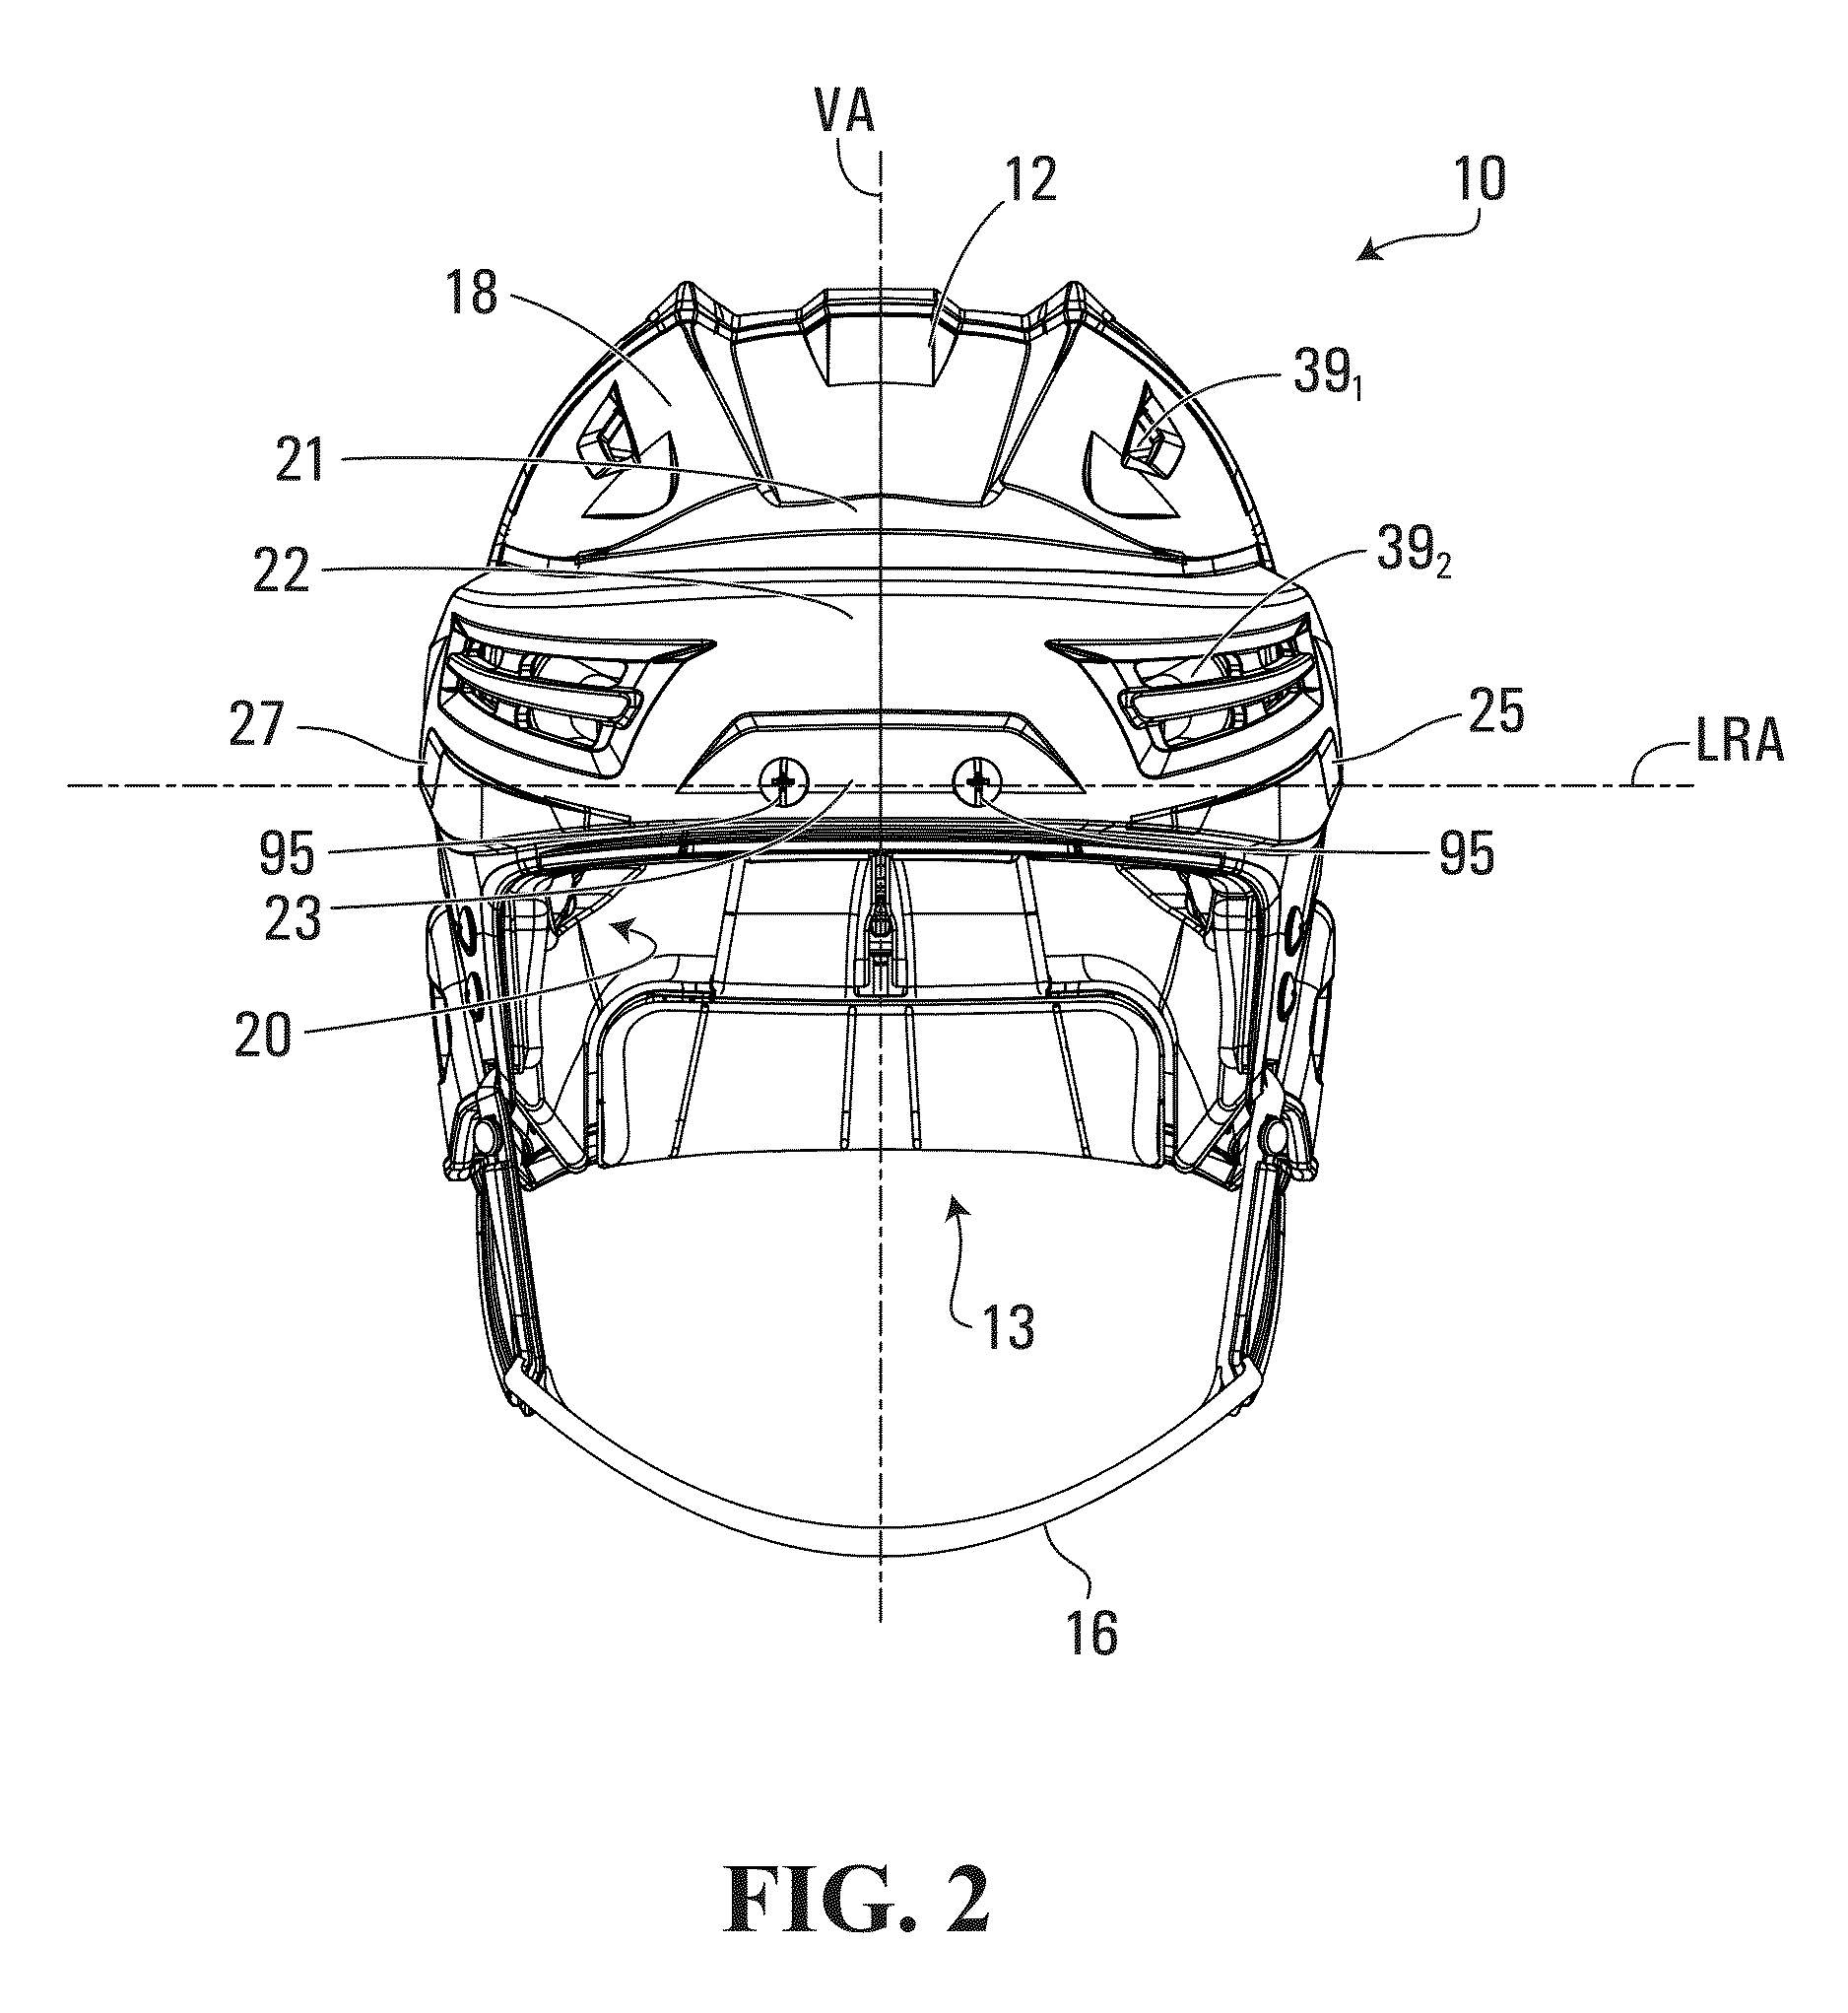 Sports helmet with rotational impact protection